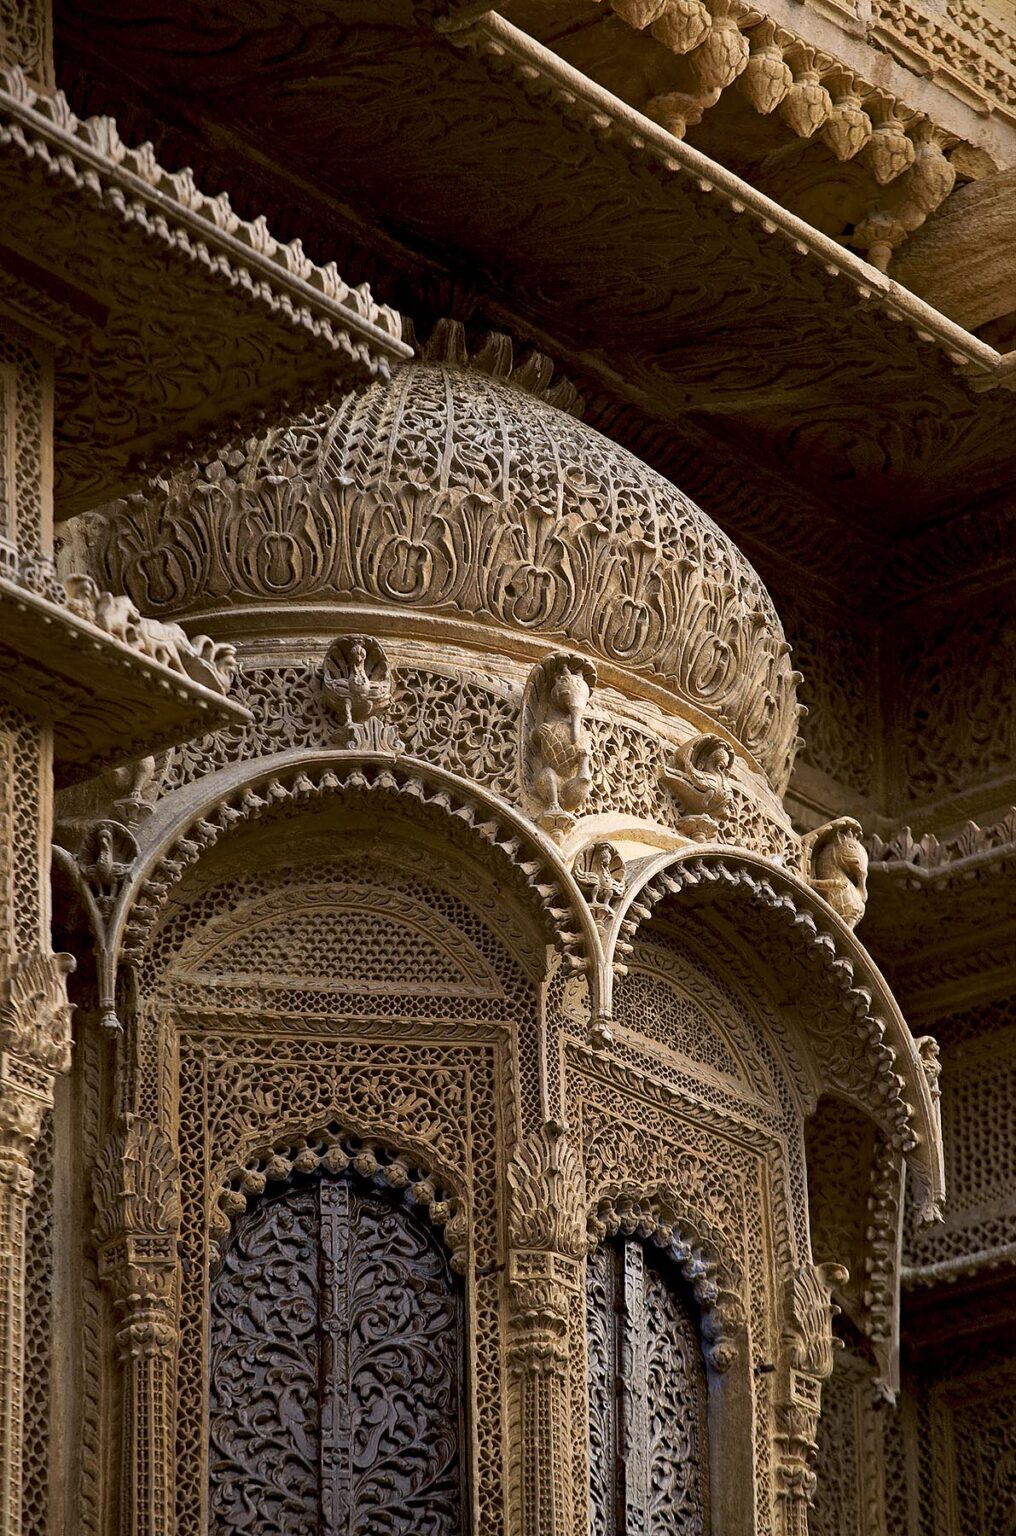 A hand carved SANDSTONE BAY WINDOW of the Mayors beautiful HAVELI or home in JAISALMER - RAJASTHAN, INDIA